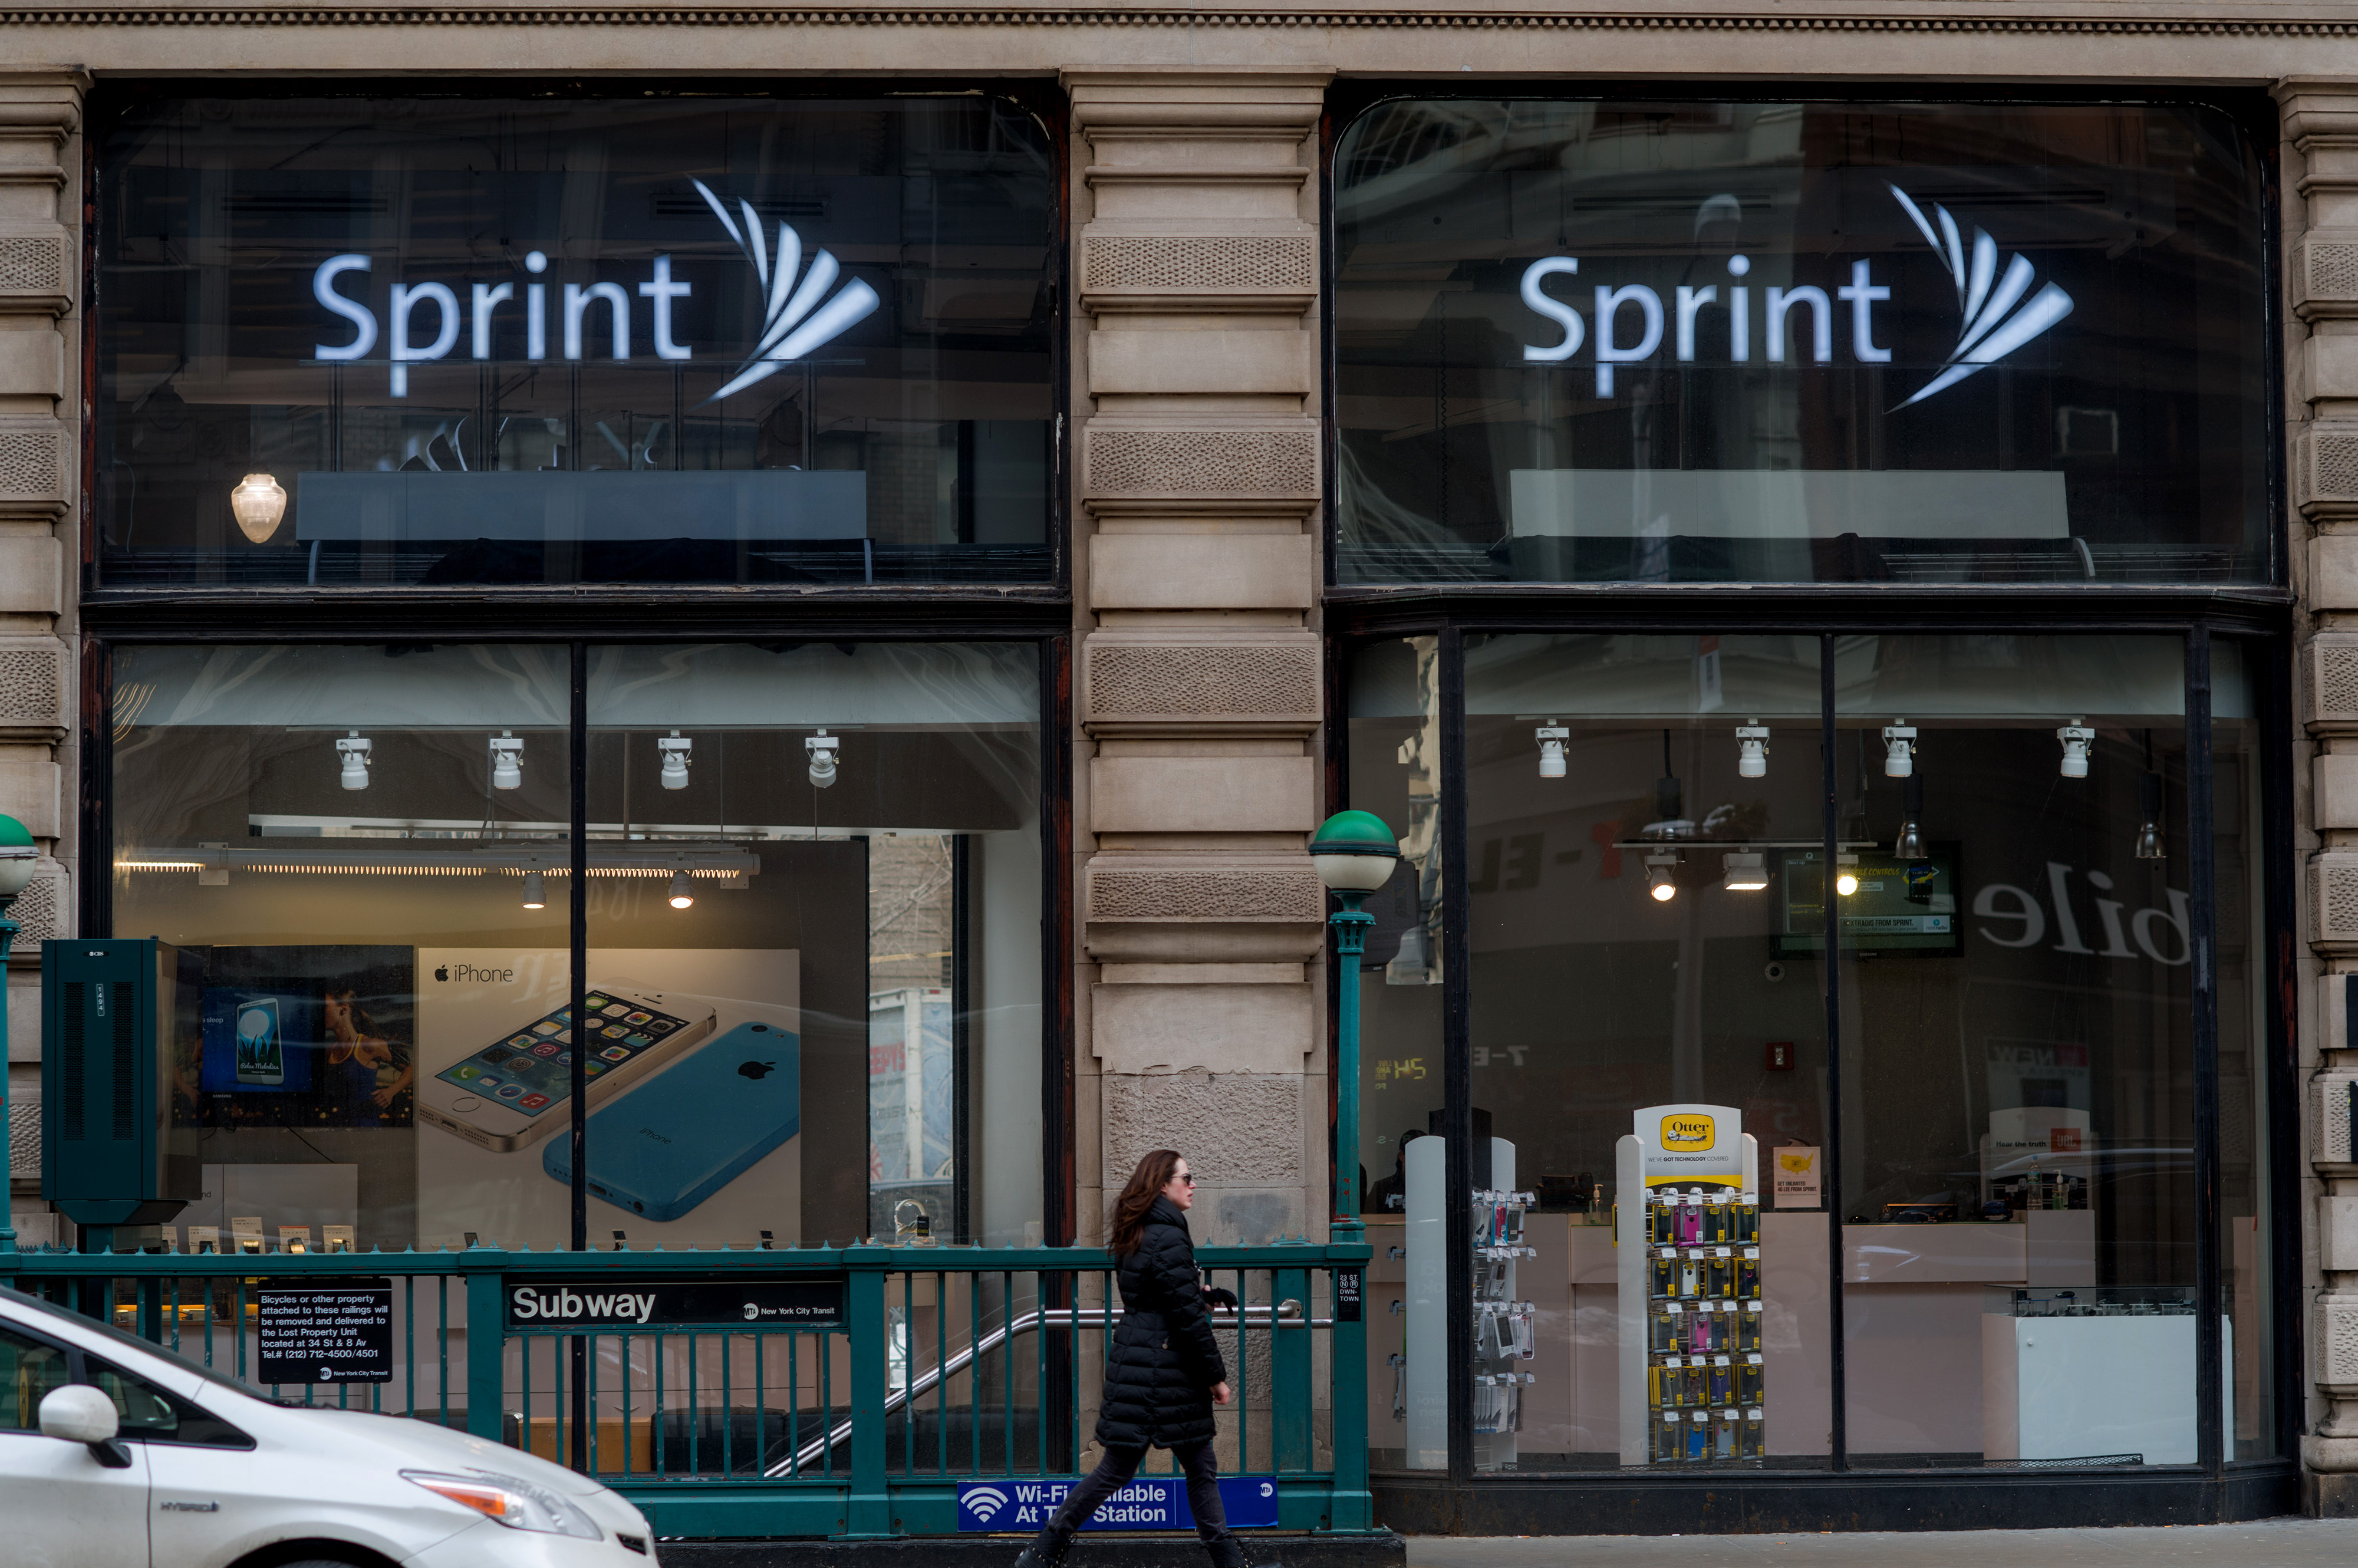 A pedestrian passes in front of a Sprint store in New York City on Saturday, Feb. 8, 2014. (Bloomberg—Bloomberg via Getty Images)